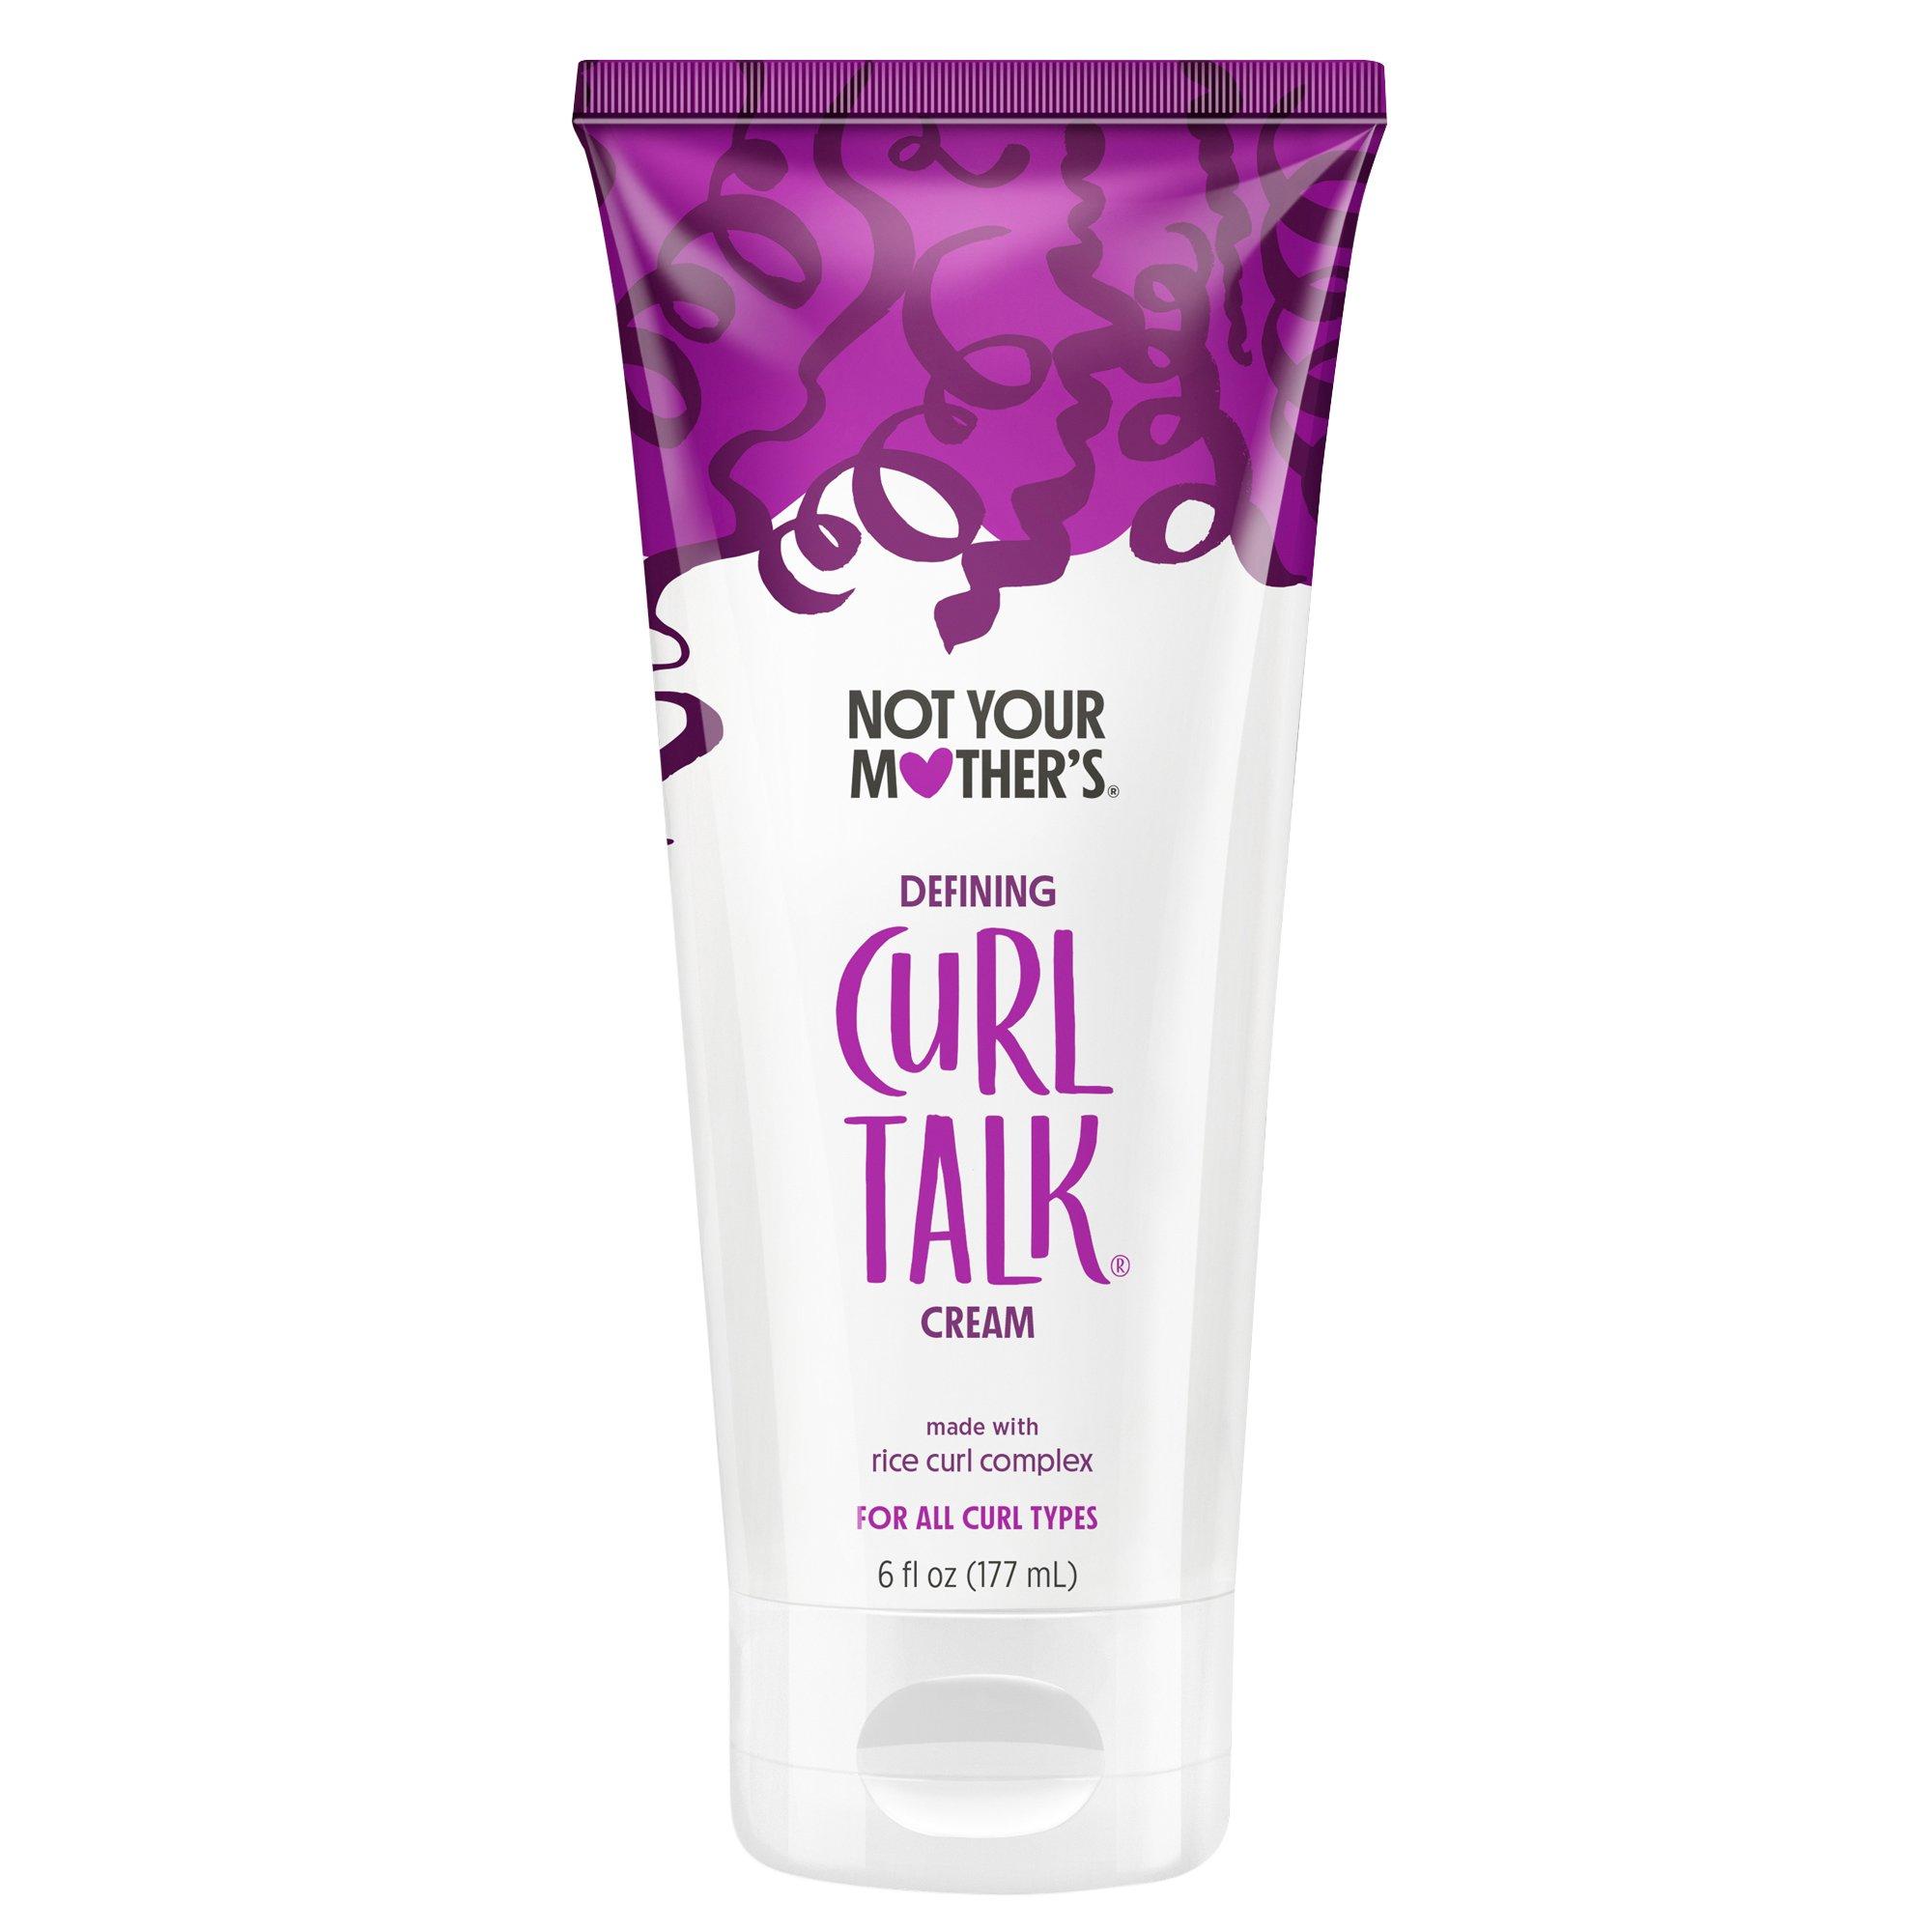 Not Your Mother's Curl Talk Defining Cream For